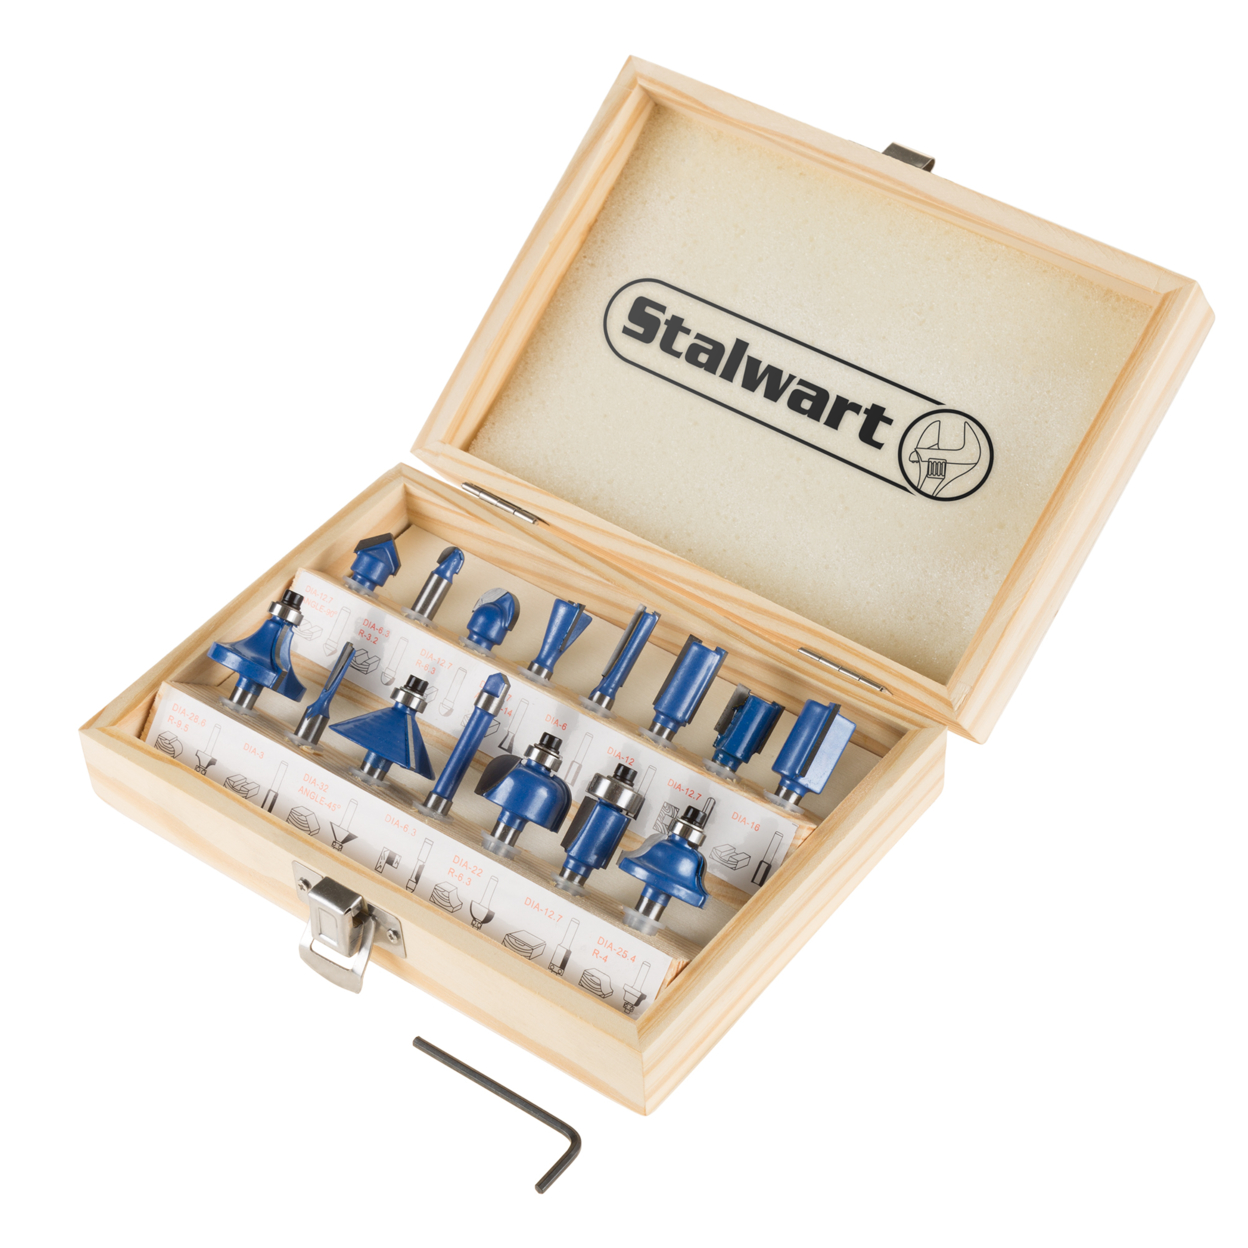 Router Bit Set- 15 Piece Kit With 1/4 Inch Shank And Wood Storage Case